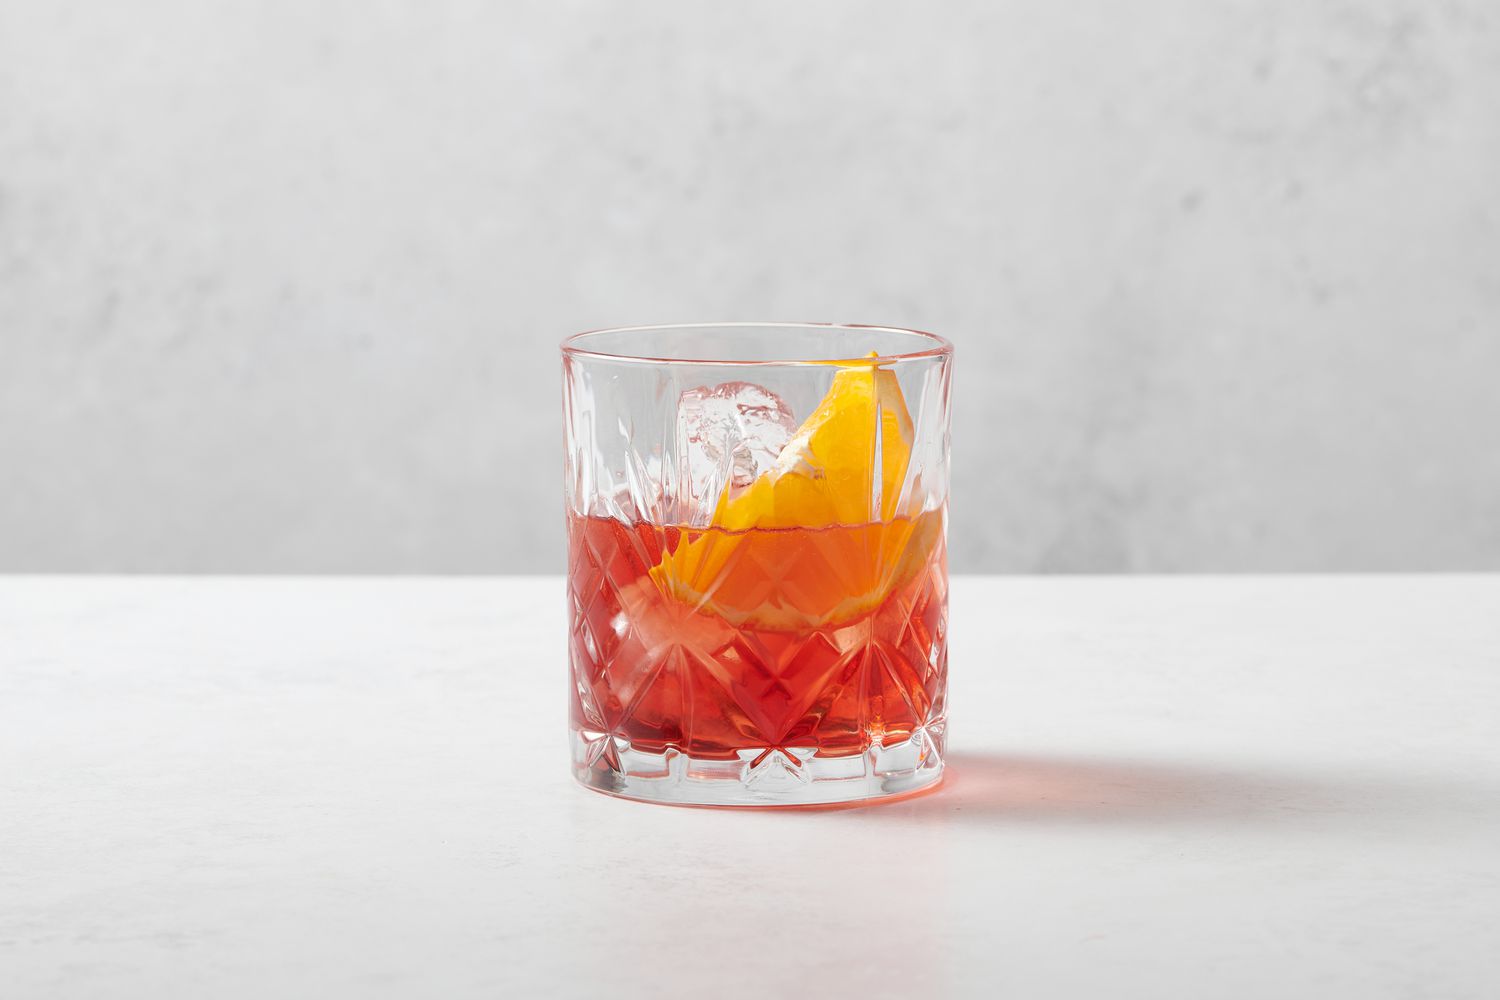 A Negroni Sbagliato cocktail garnished with an orange slice